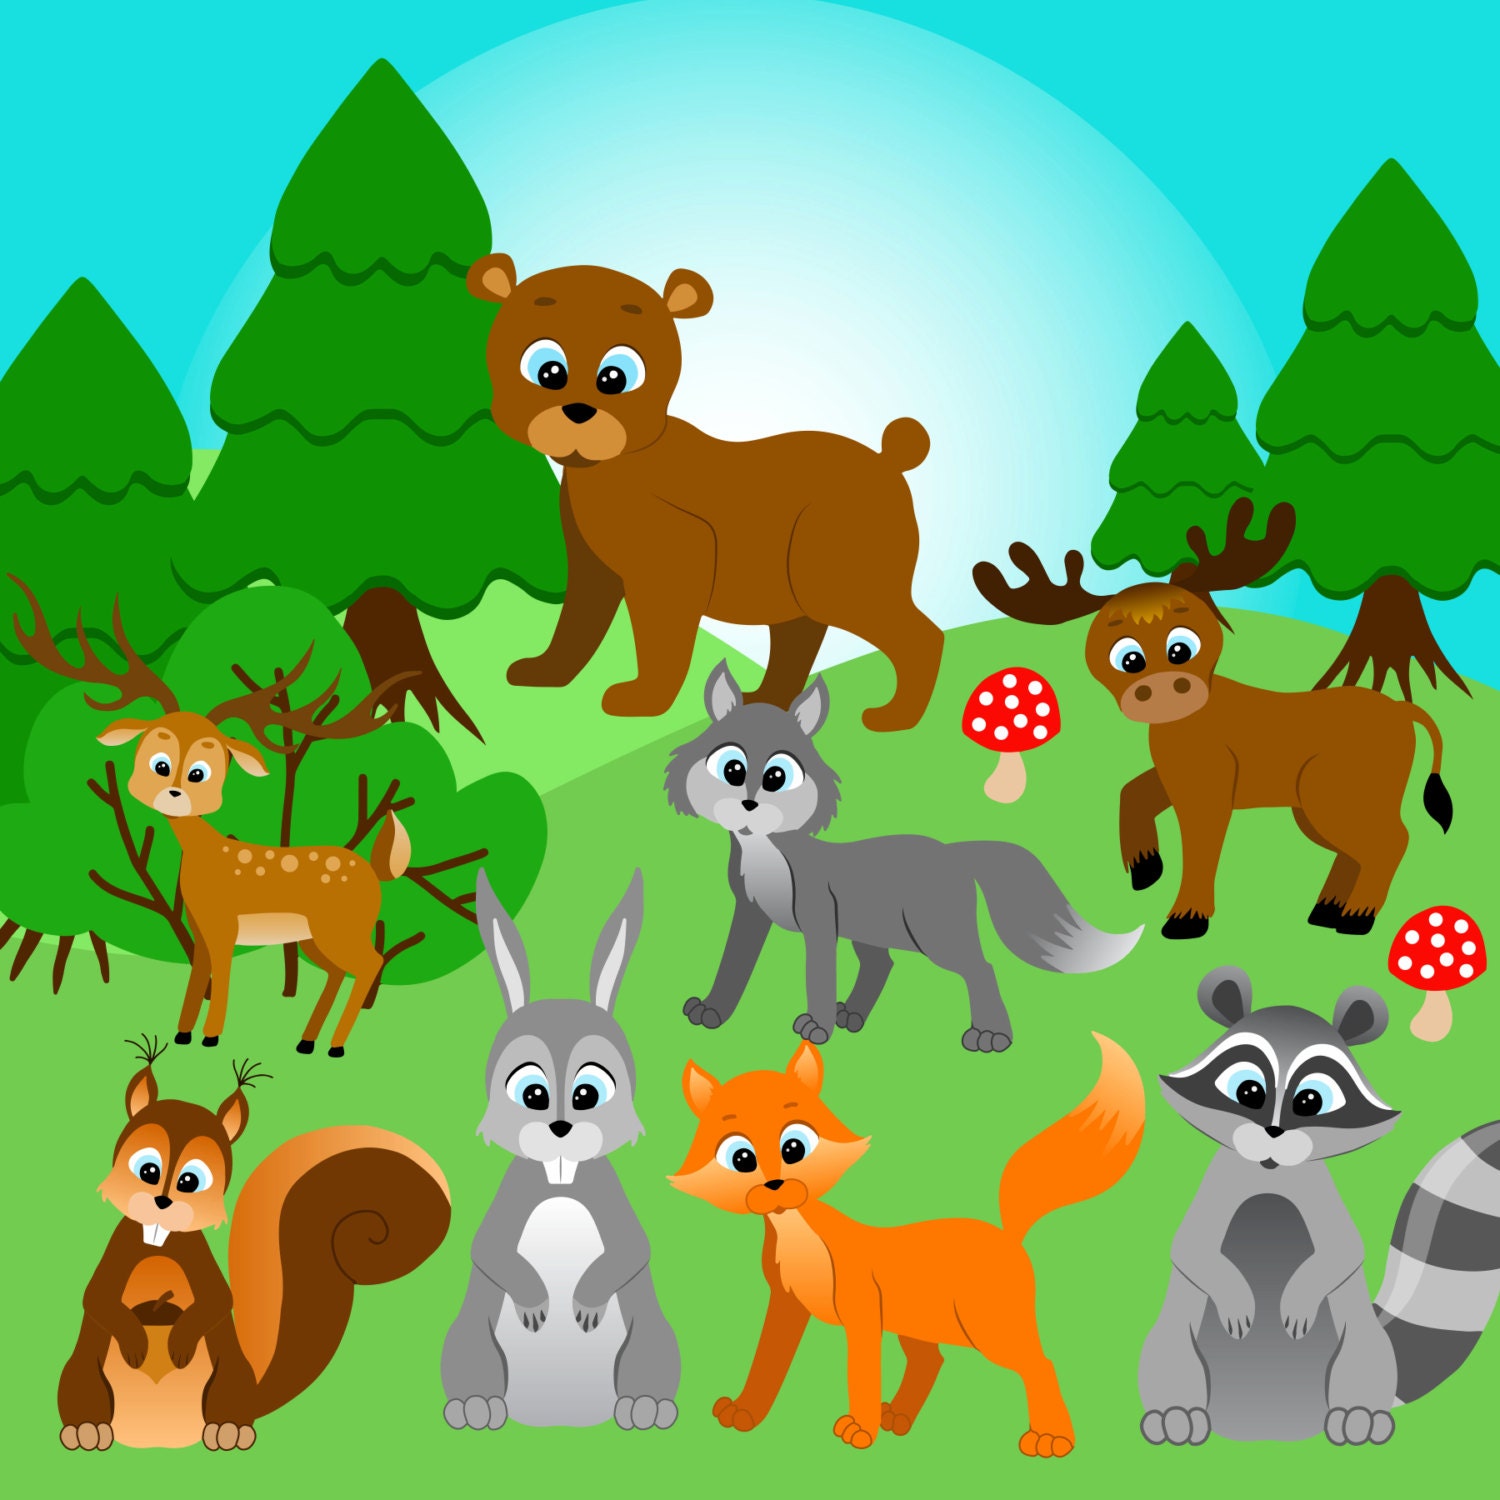 Forest animals clipart Forest clip art Woodland Clipart